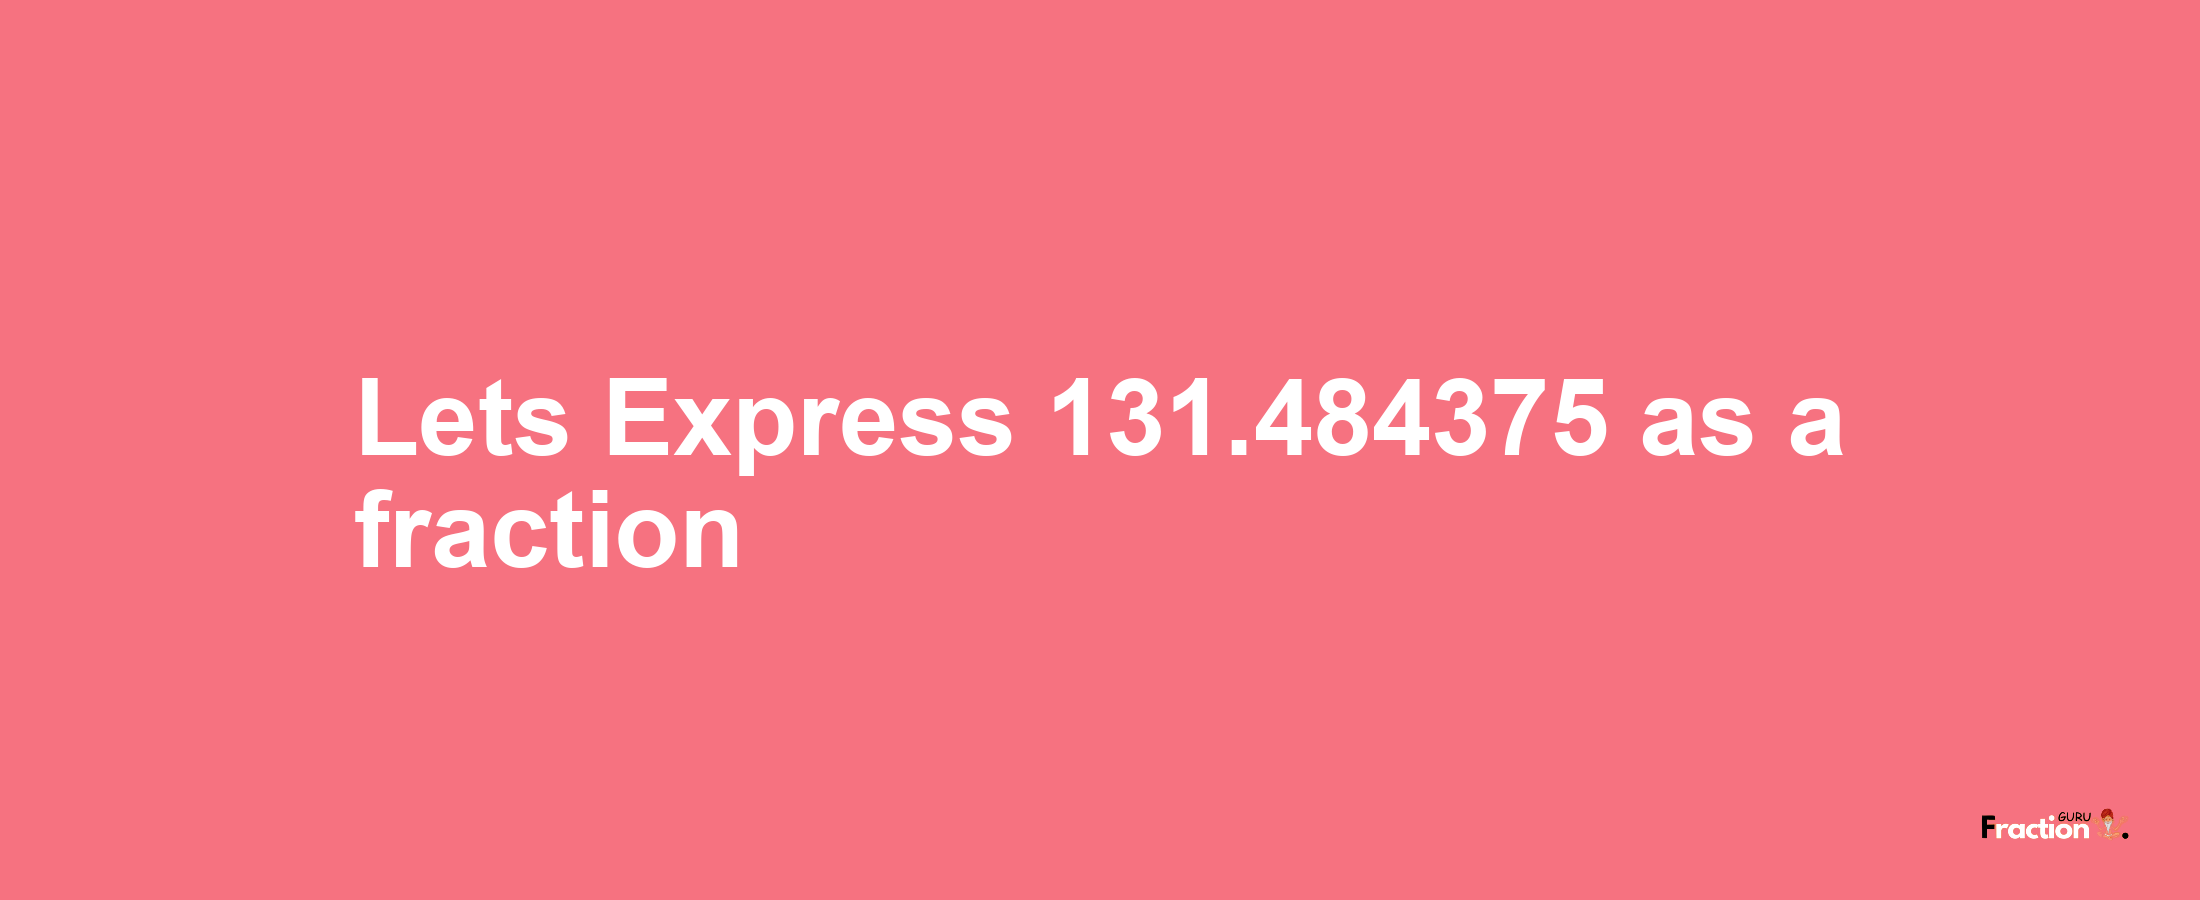 Lets Express 131.484375 as afraction